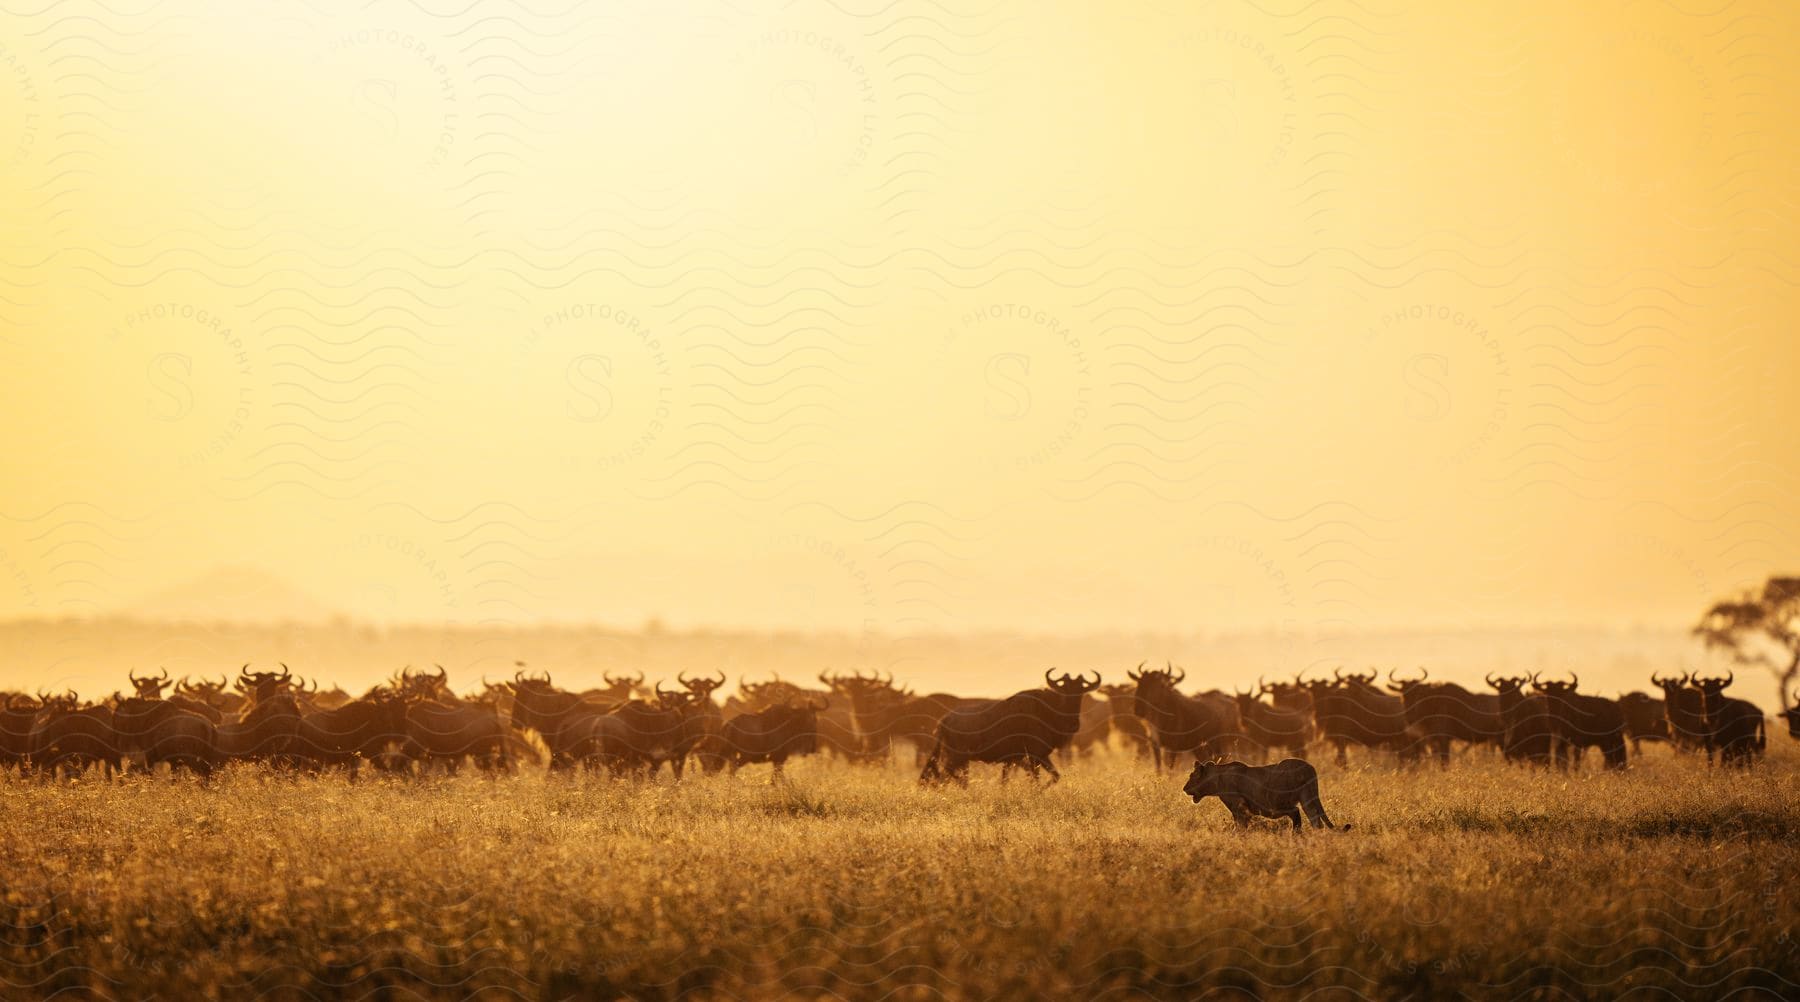 A herd of wildebeests silhouetted against a golden sunset on a grassy plain